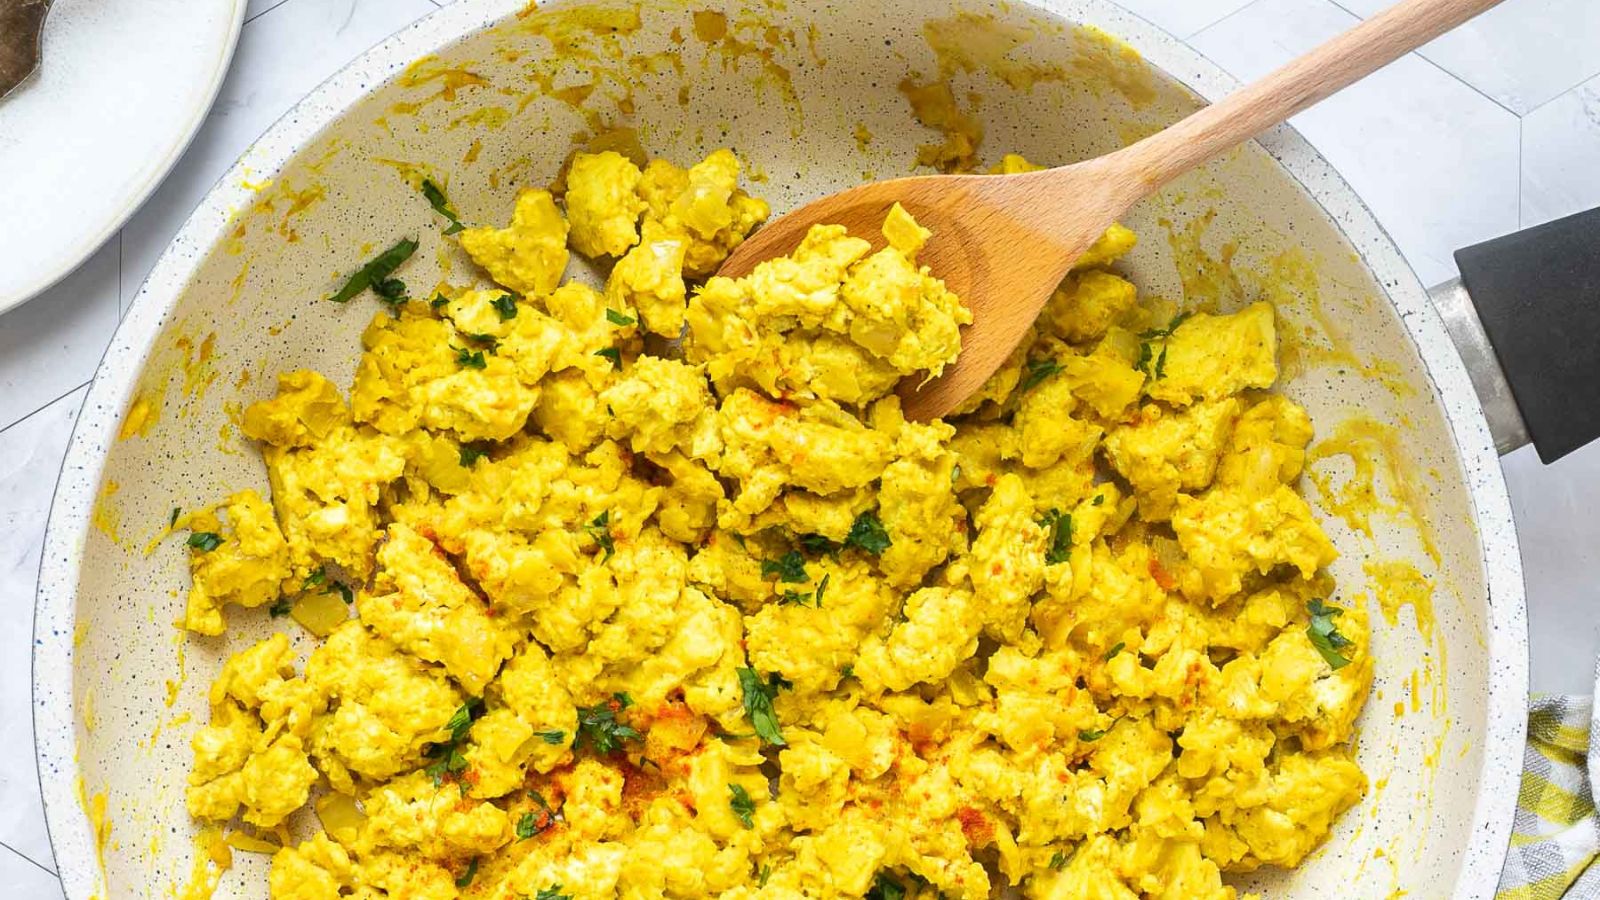 18 Fantastic Recipes With The Most Versatile Protein We Hardly Use Due To Its Bad Press